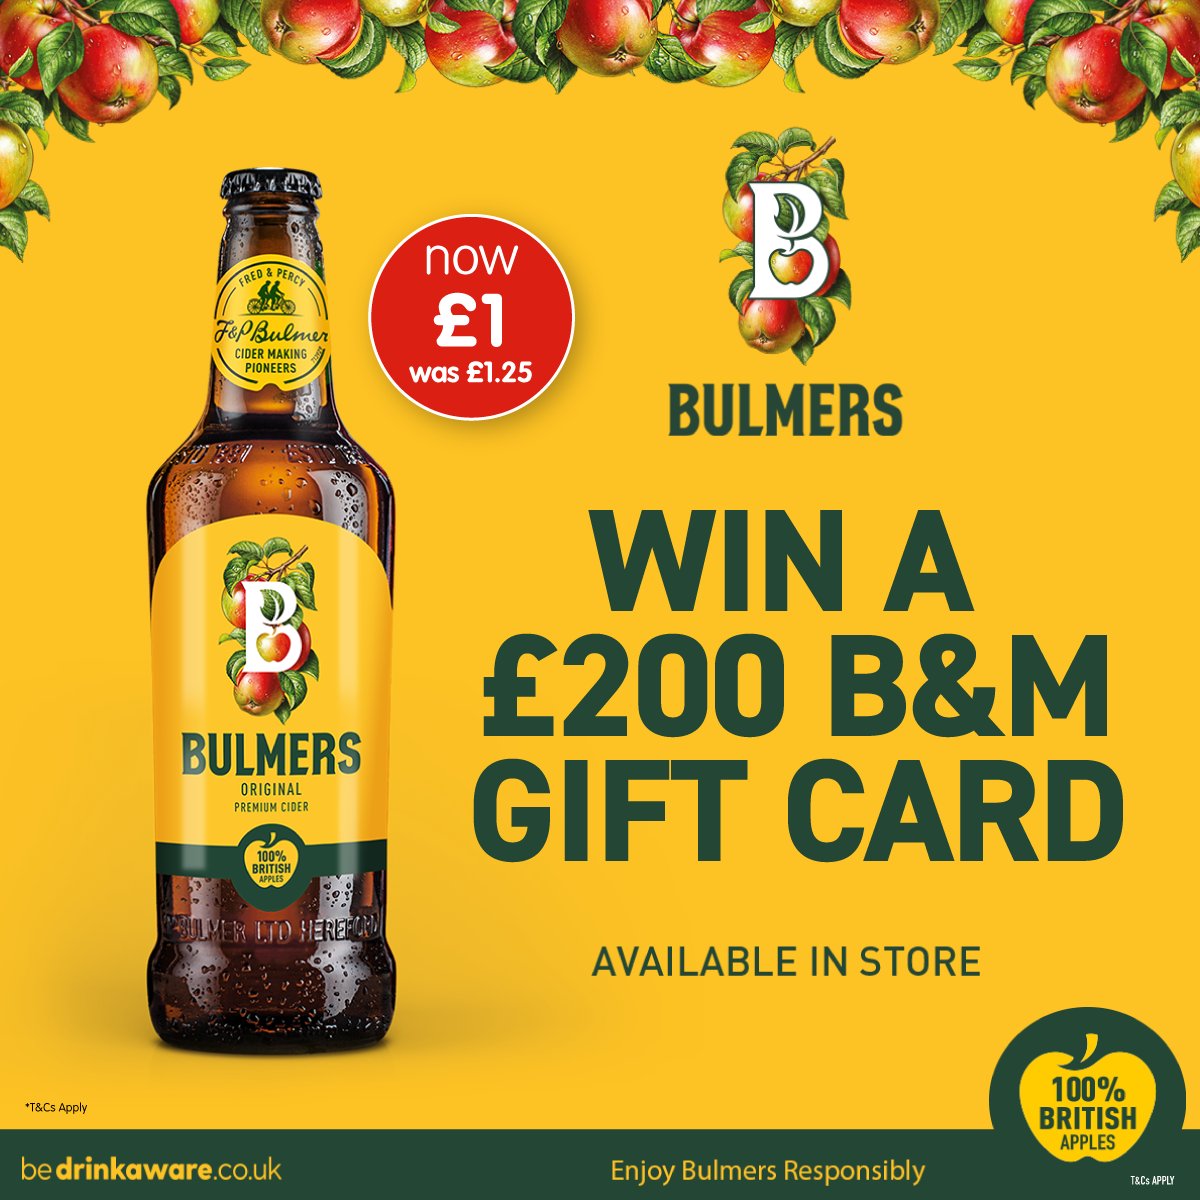 🍏 #COMPETITION TIME 🍏 Make the most of your weekend with a tasty @bulmerscider - reduced to just £1! For a chance to #WIN a £200 B&M gift card, simply; 1) FOLLOW US 2) RT 3) COMMENT #BMBulmers! Competition ends 9am 26/8/22